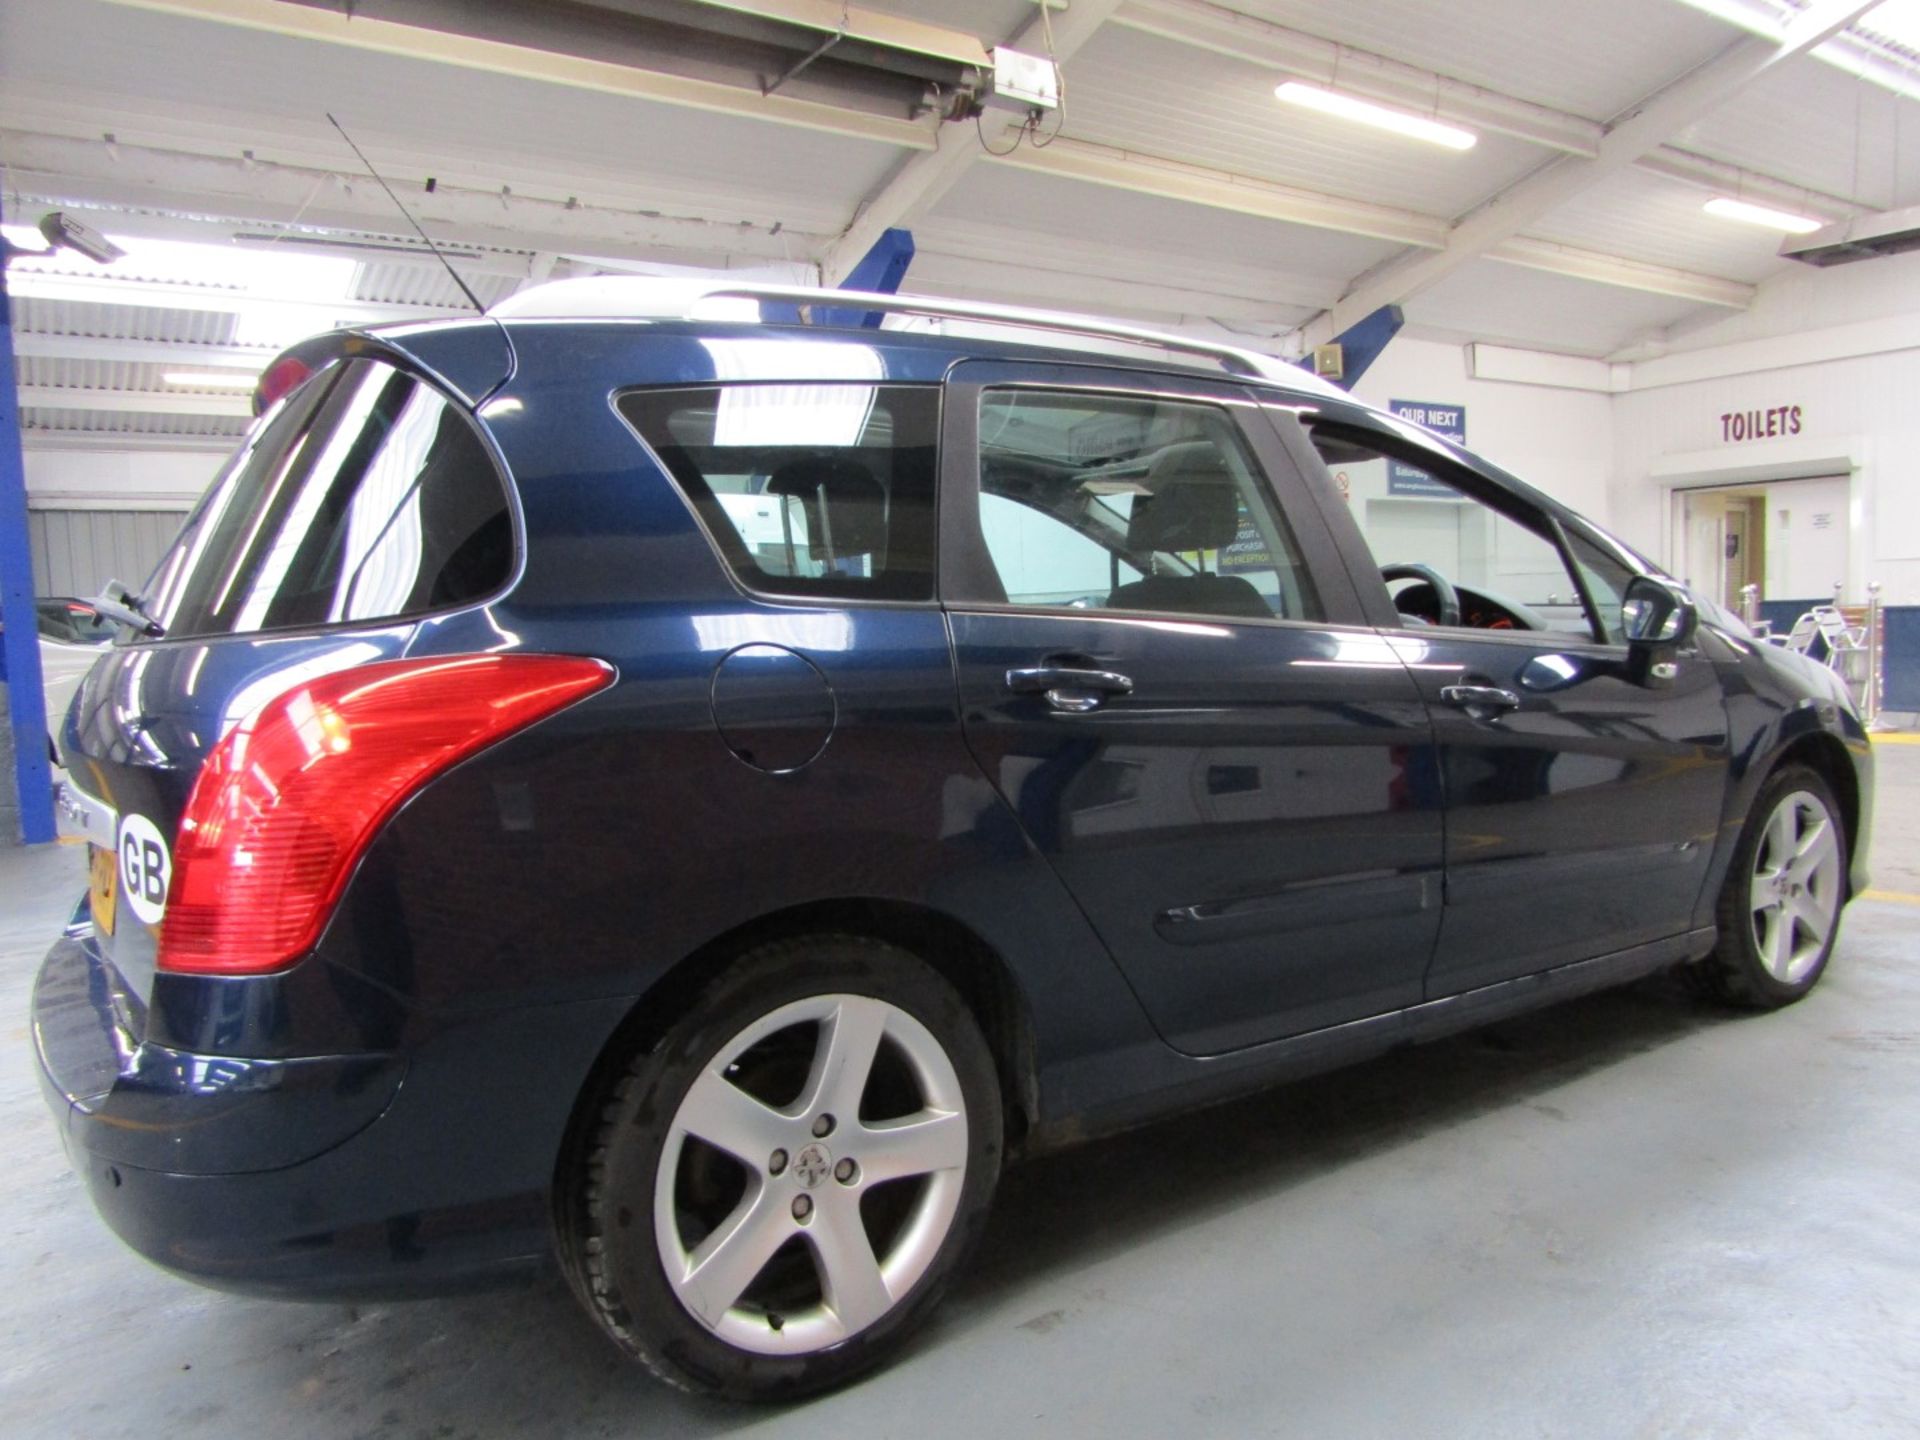 09 09 Peugeot 308 sport SW HDI 110 - Image 23 of 28